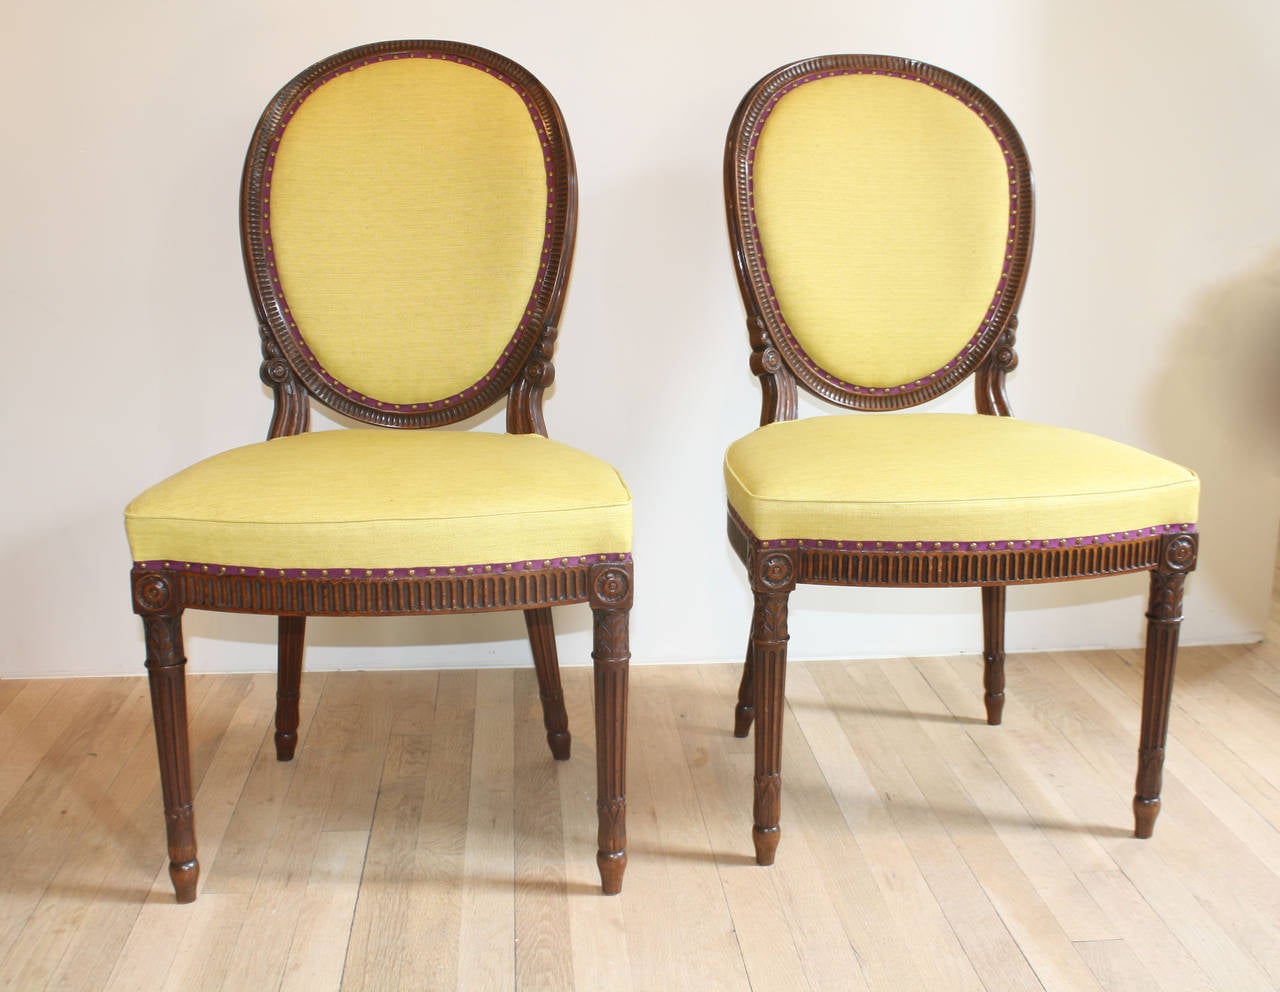 Set of six Adam side chairs, English, circa 1775
Reupholstered in yellow linen with aubergine trim.